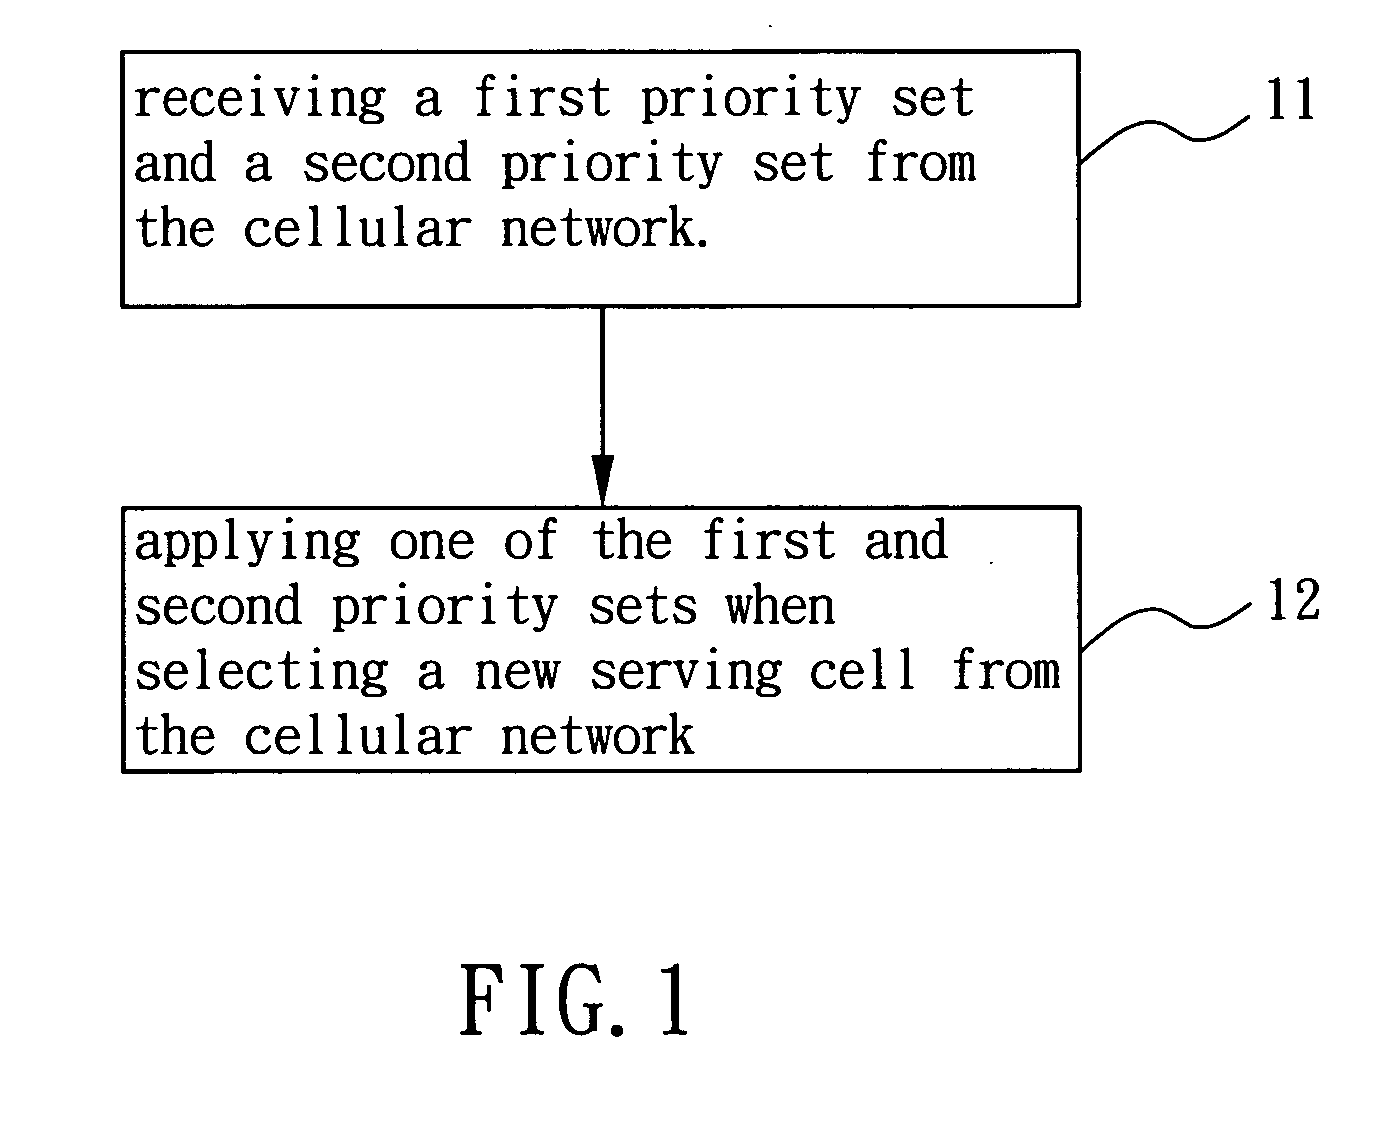 Method for improving cell load balance in cellular network and associated user equipment